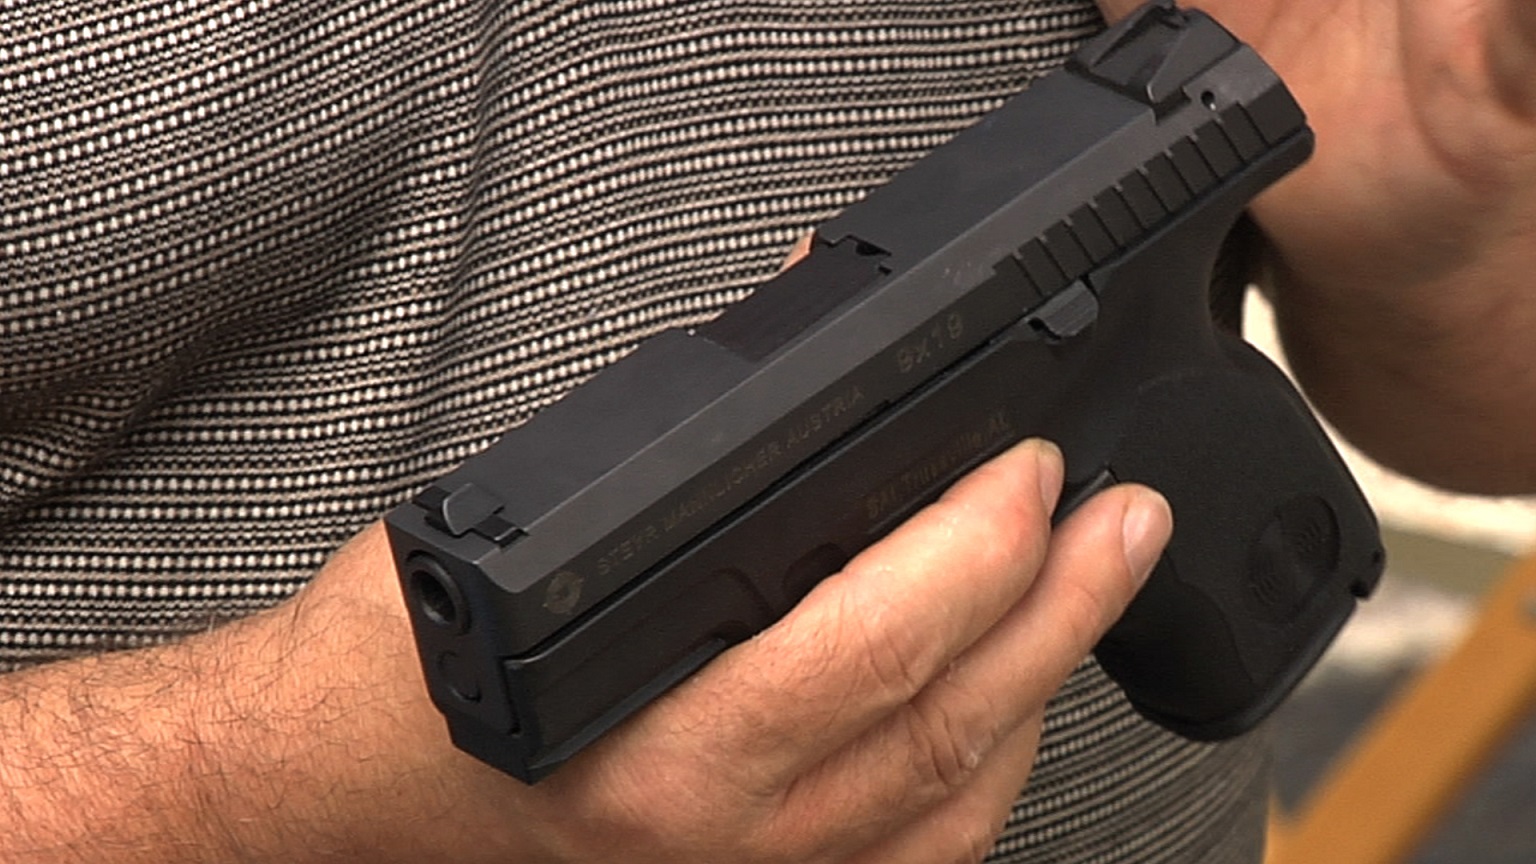 Learn How to Break In a Handgun product featured image thumbnail.